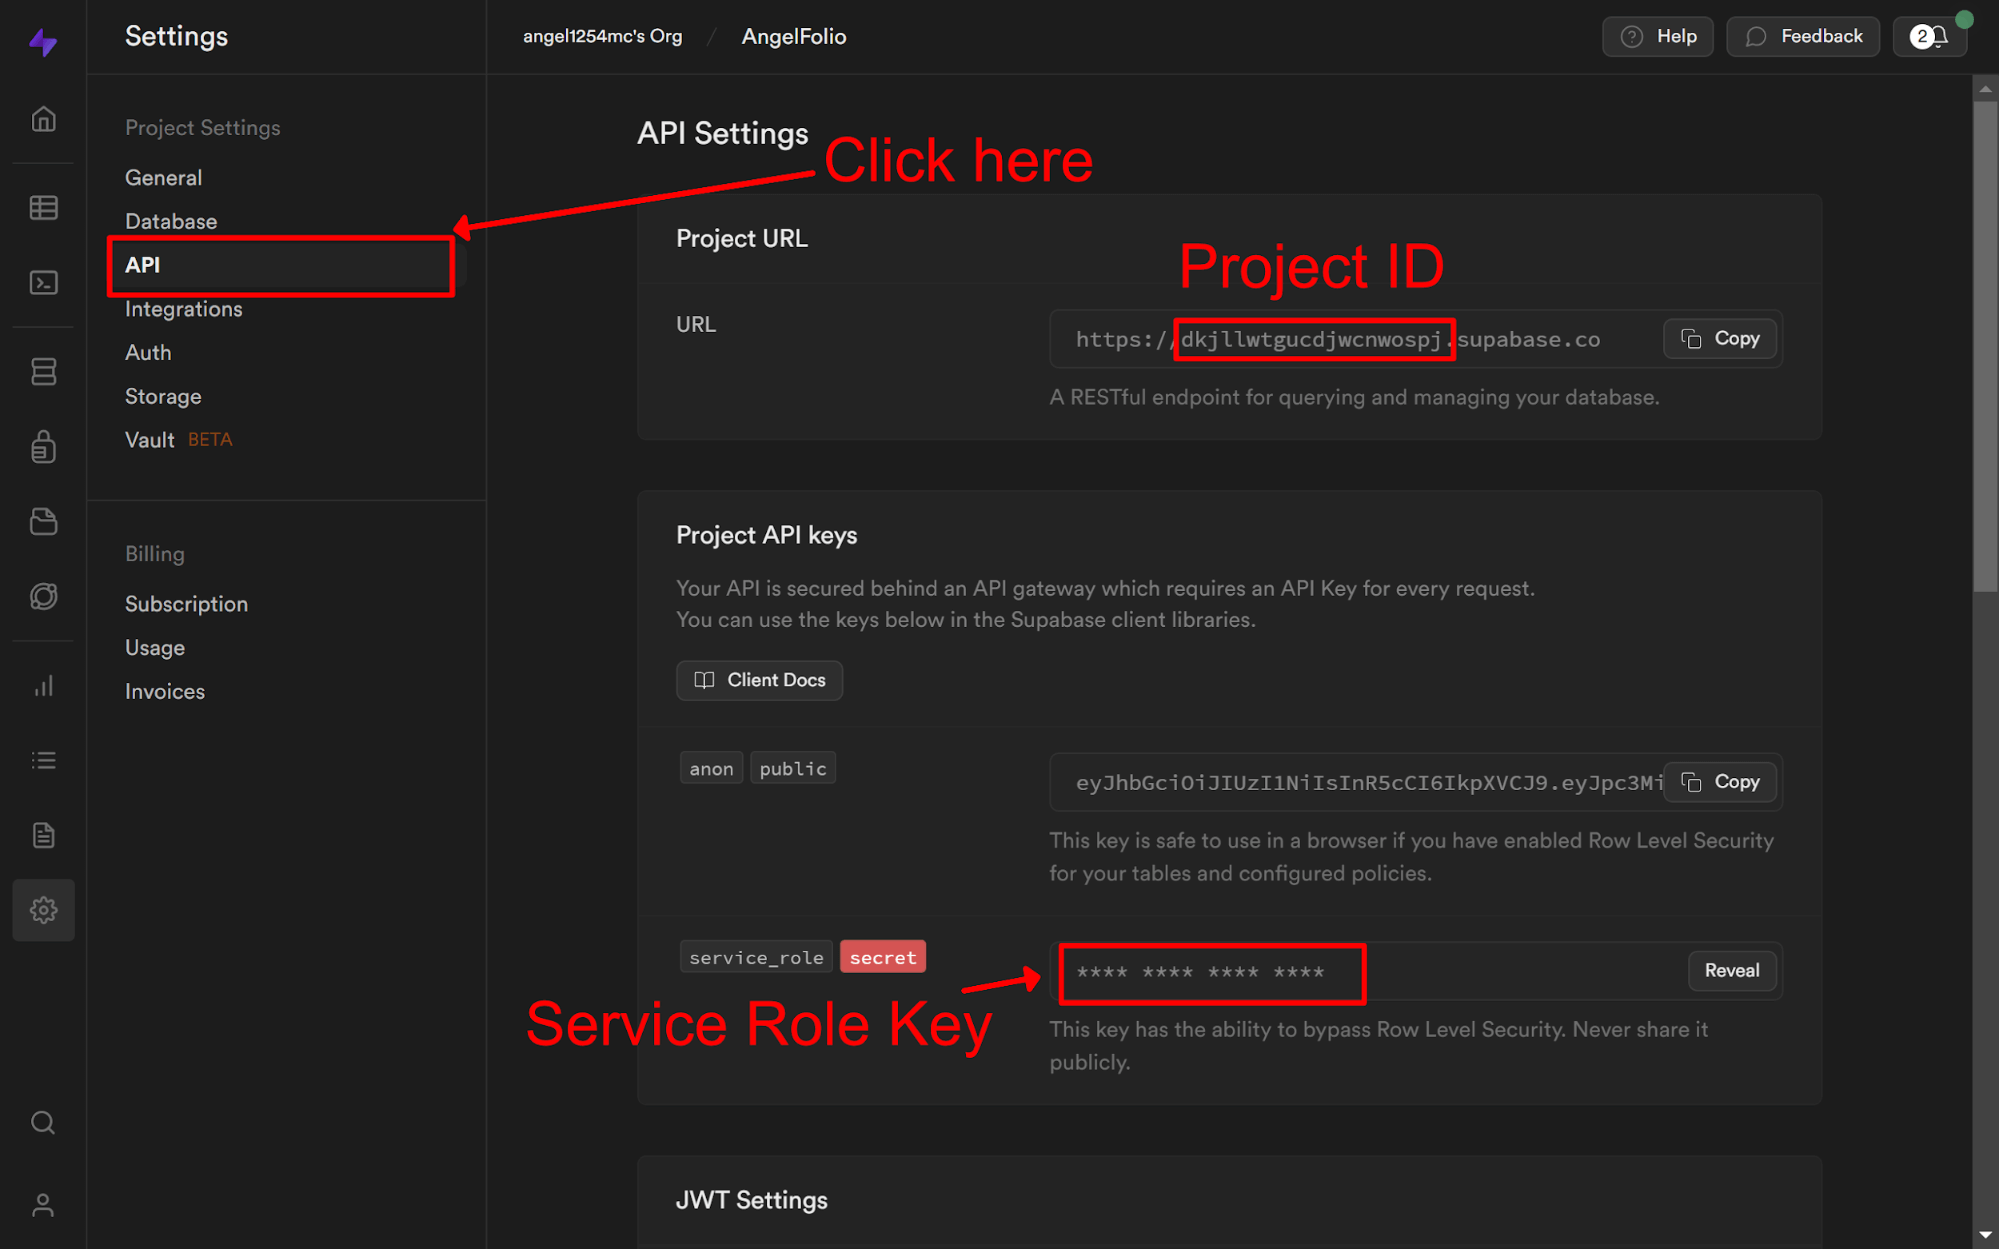 A screenshot shows where to get the Project ID and Service Role Key in Supabase.